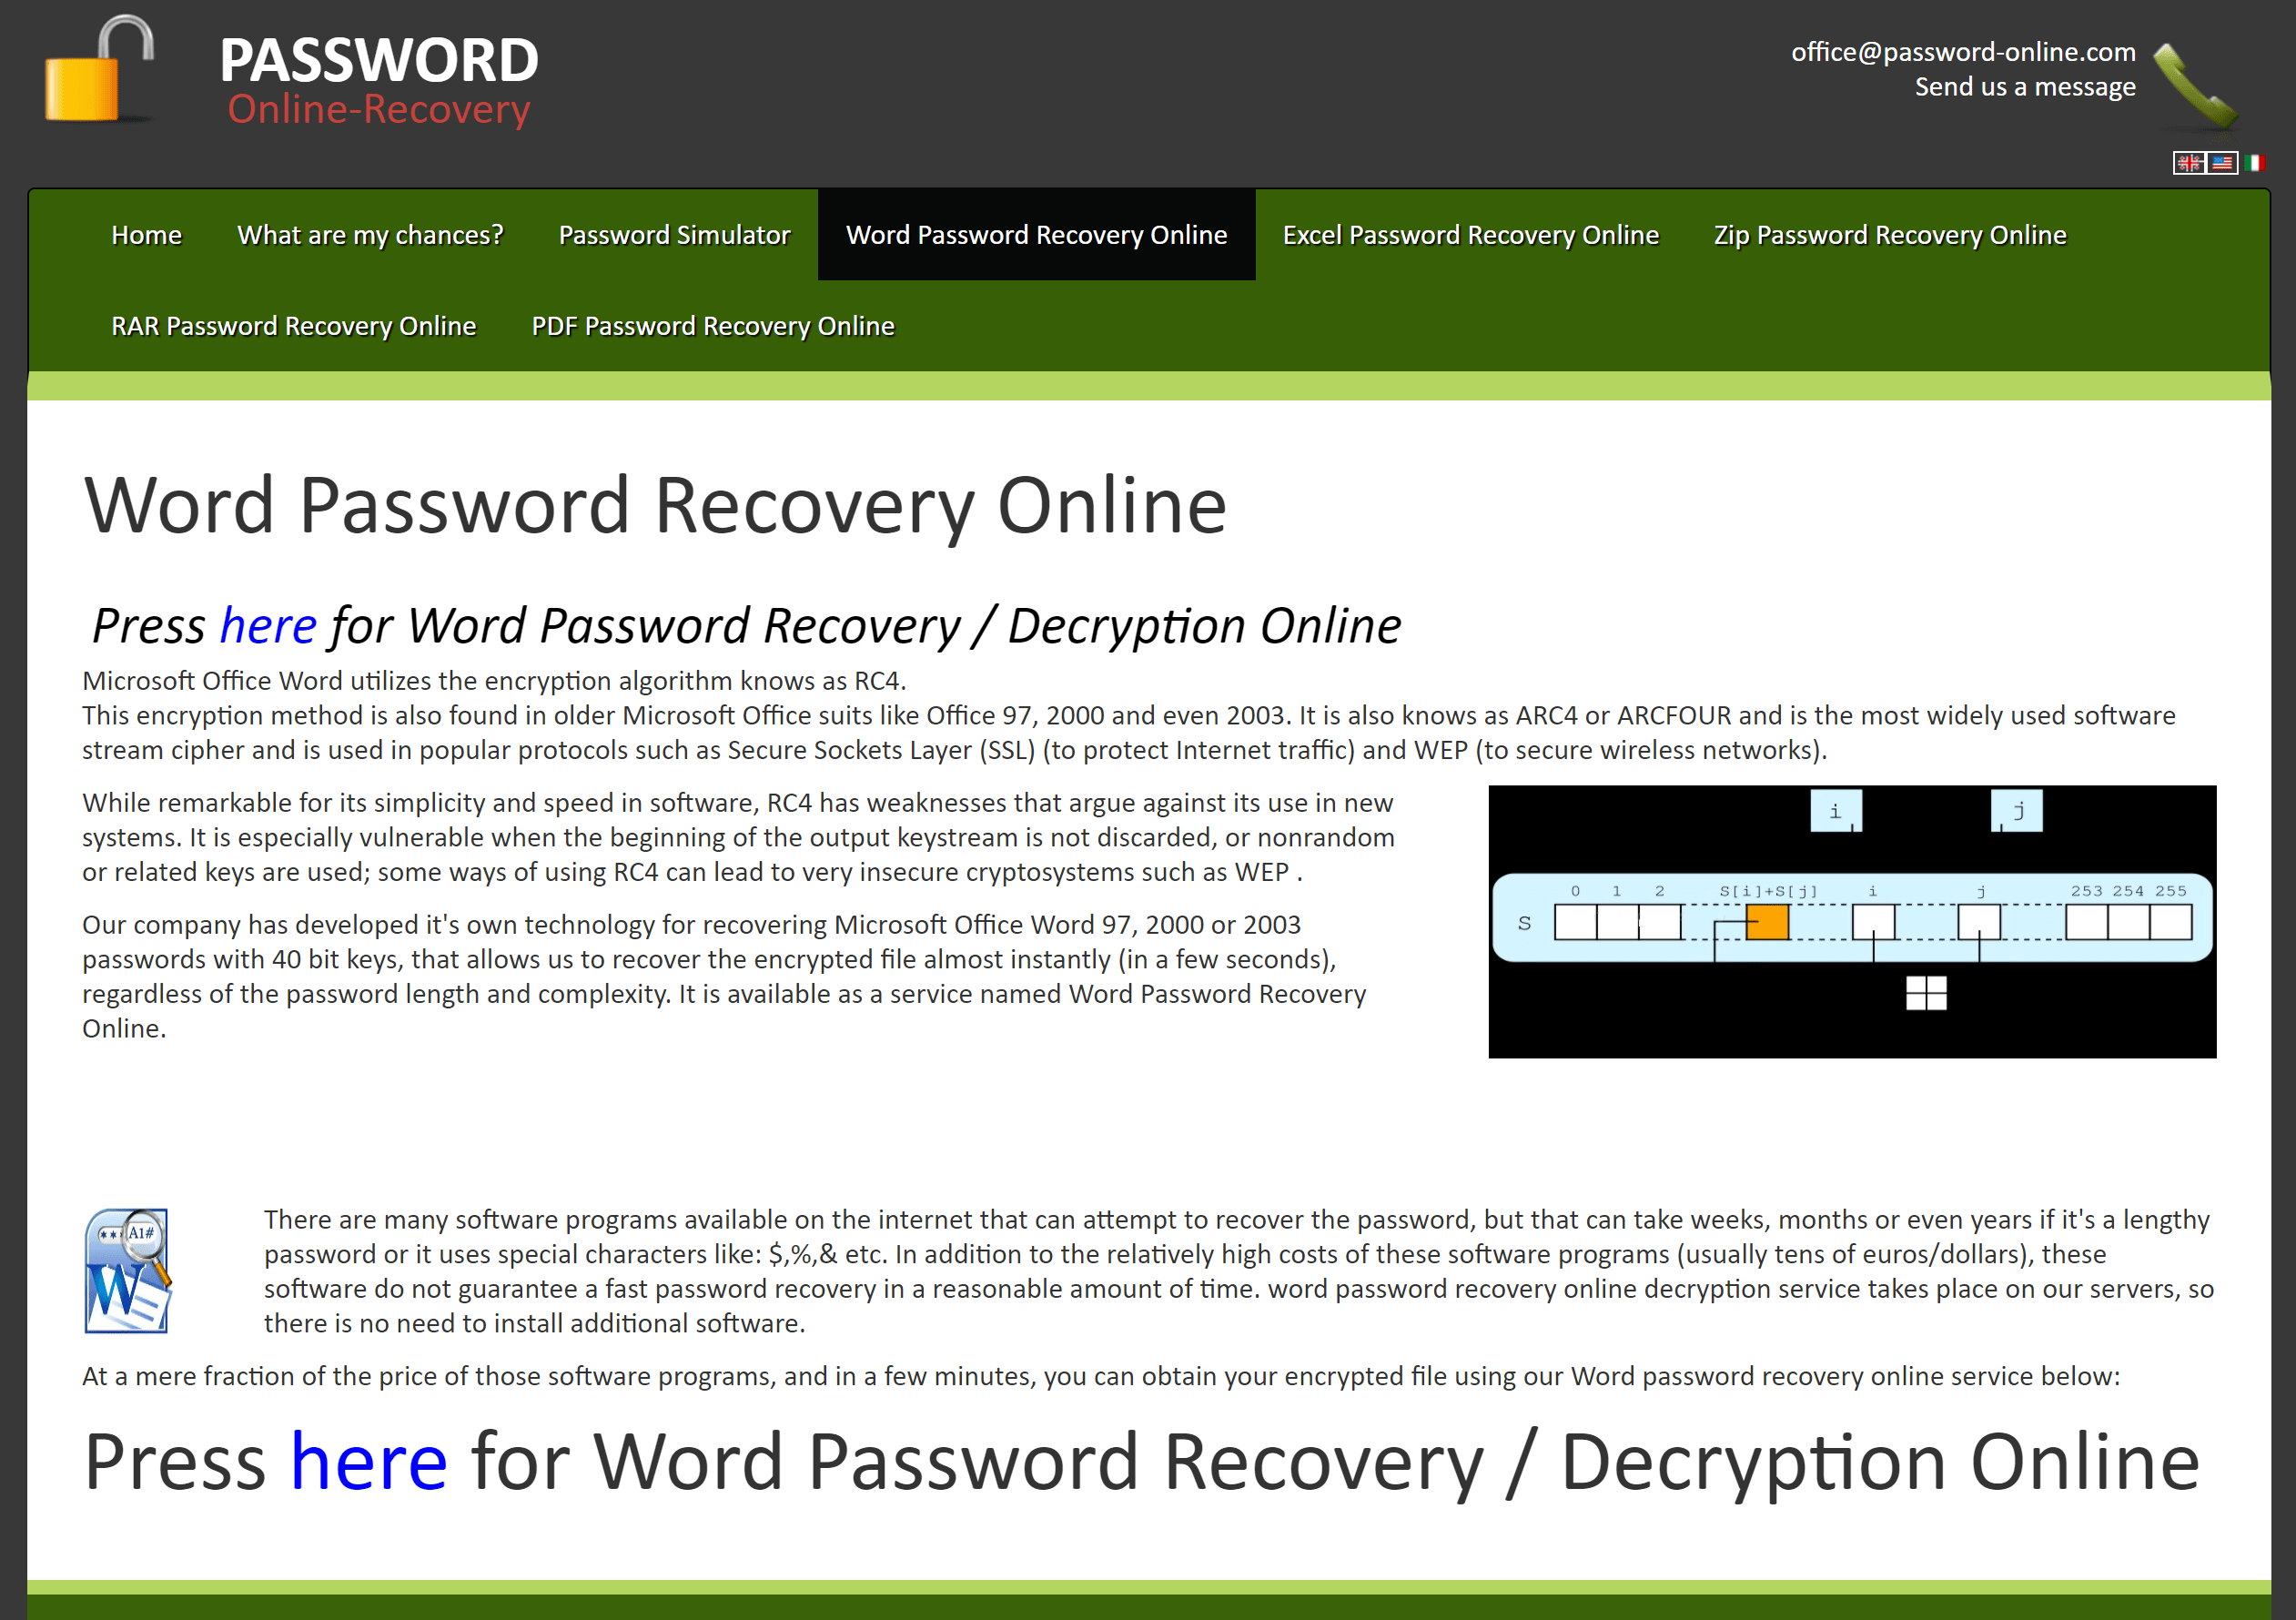 PASSWORD Online-Recovery Word Password Recovery Online